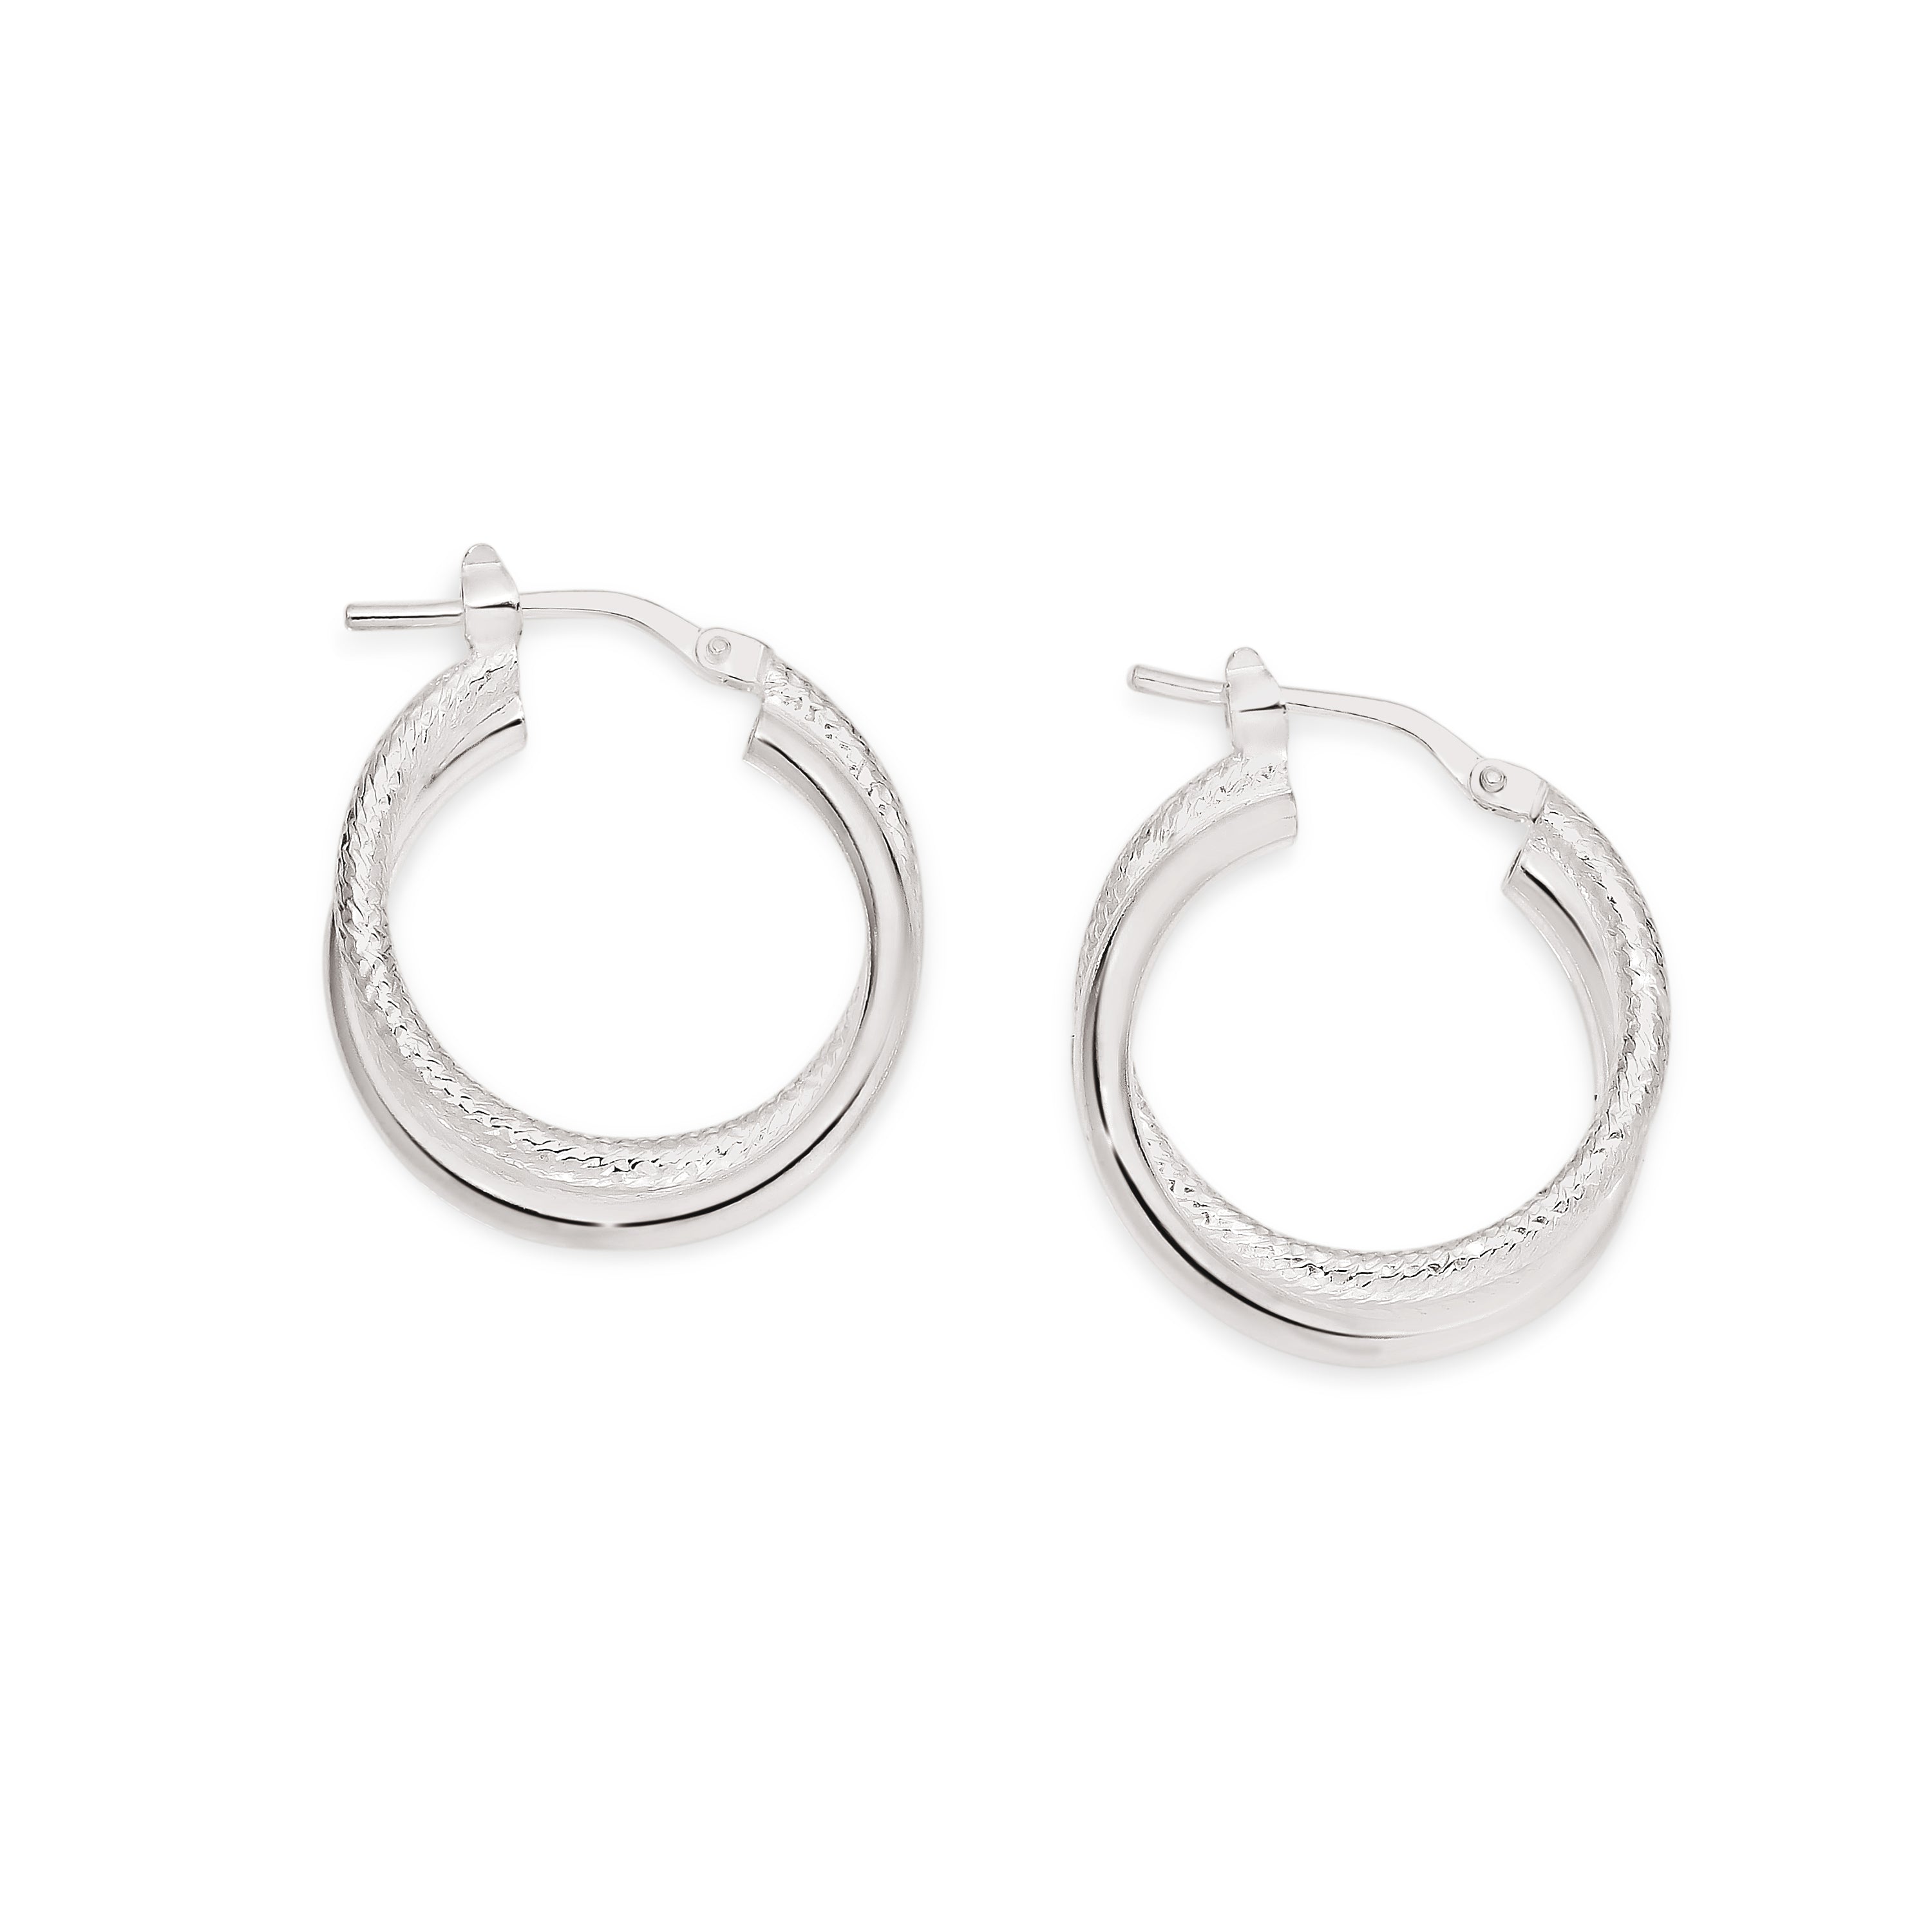 Silver double tube polished & textured hoops 15mm